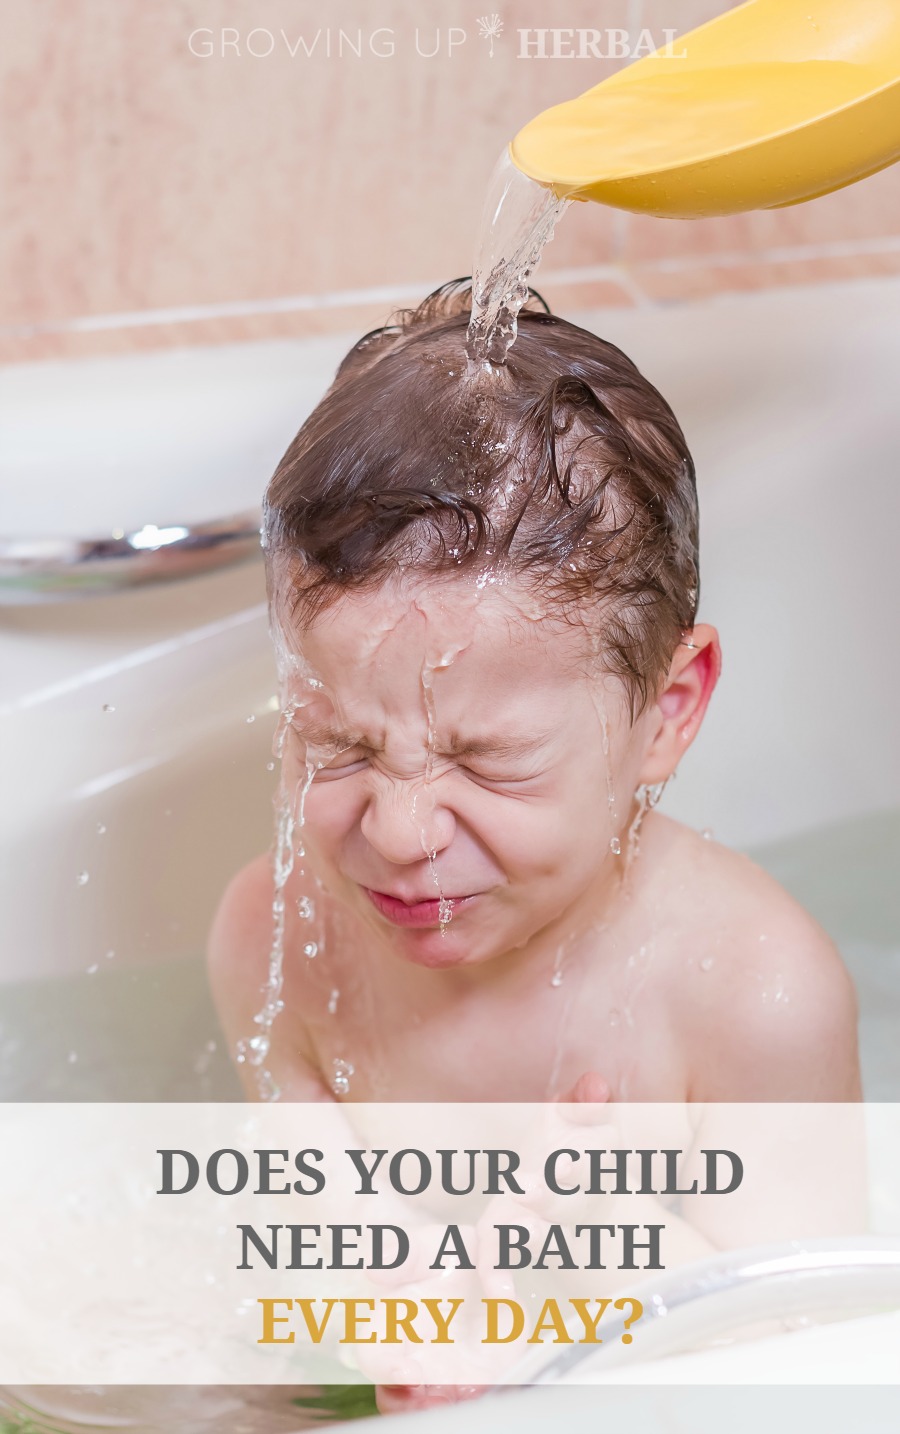 Does Your Kiddo Need A Bath Every Day? | GrowingUpHerbal.com | Do kids really need a bath everyday? Find out here.